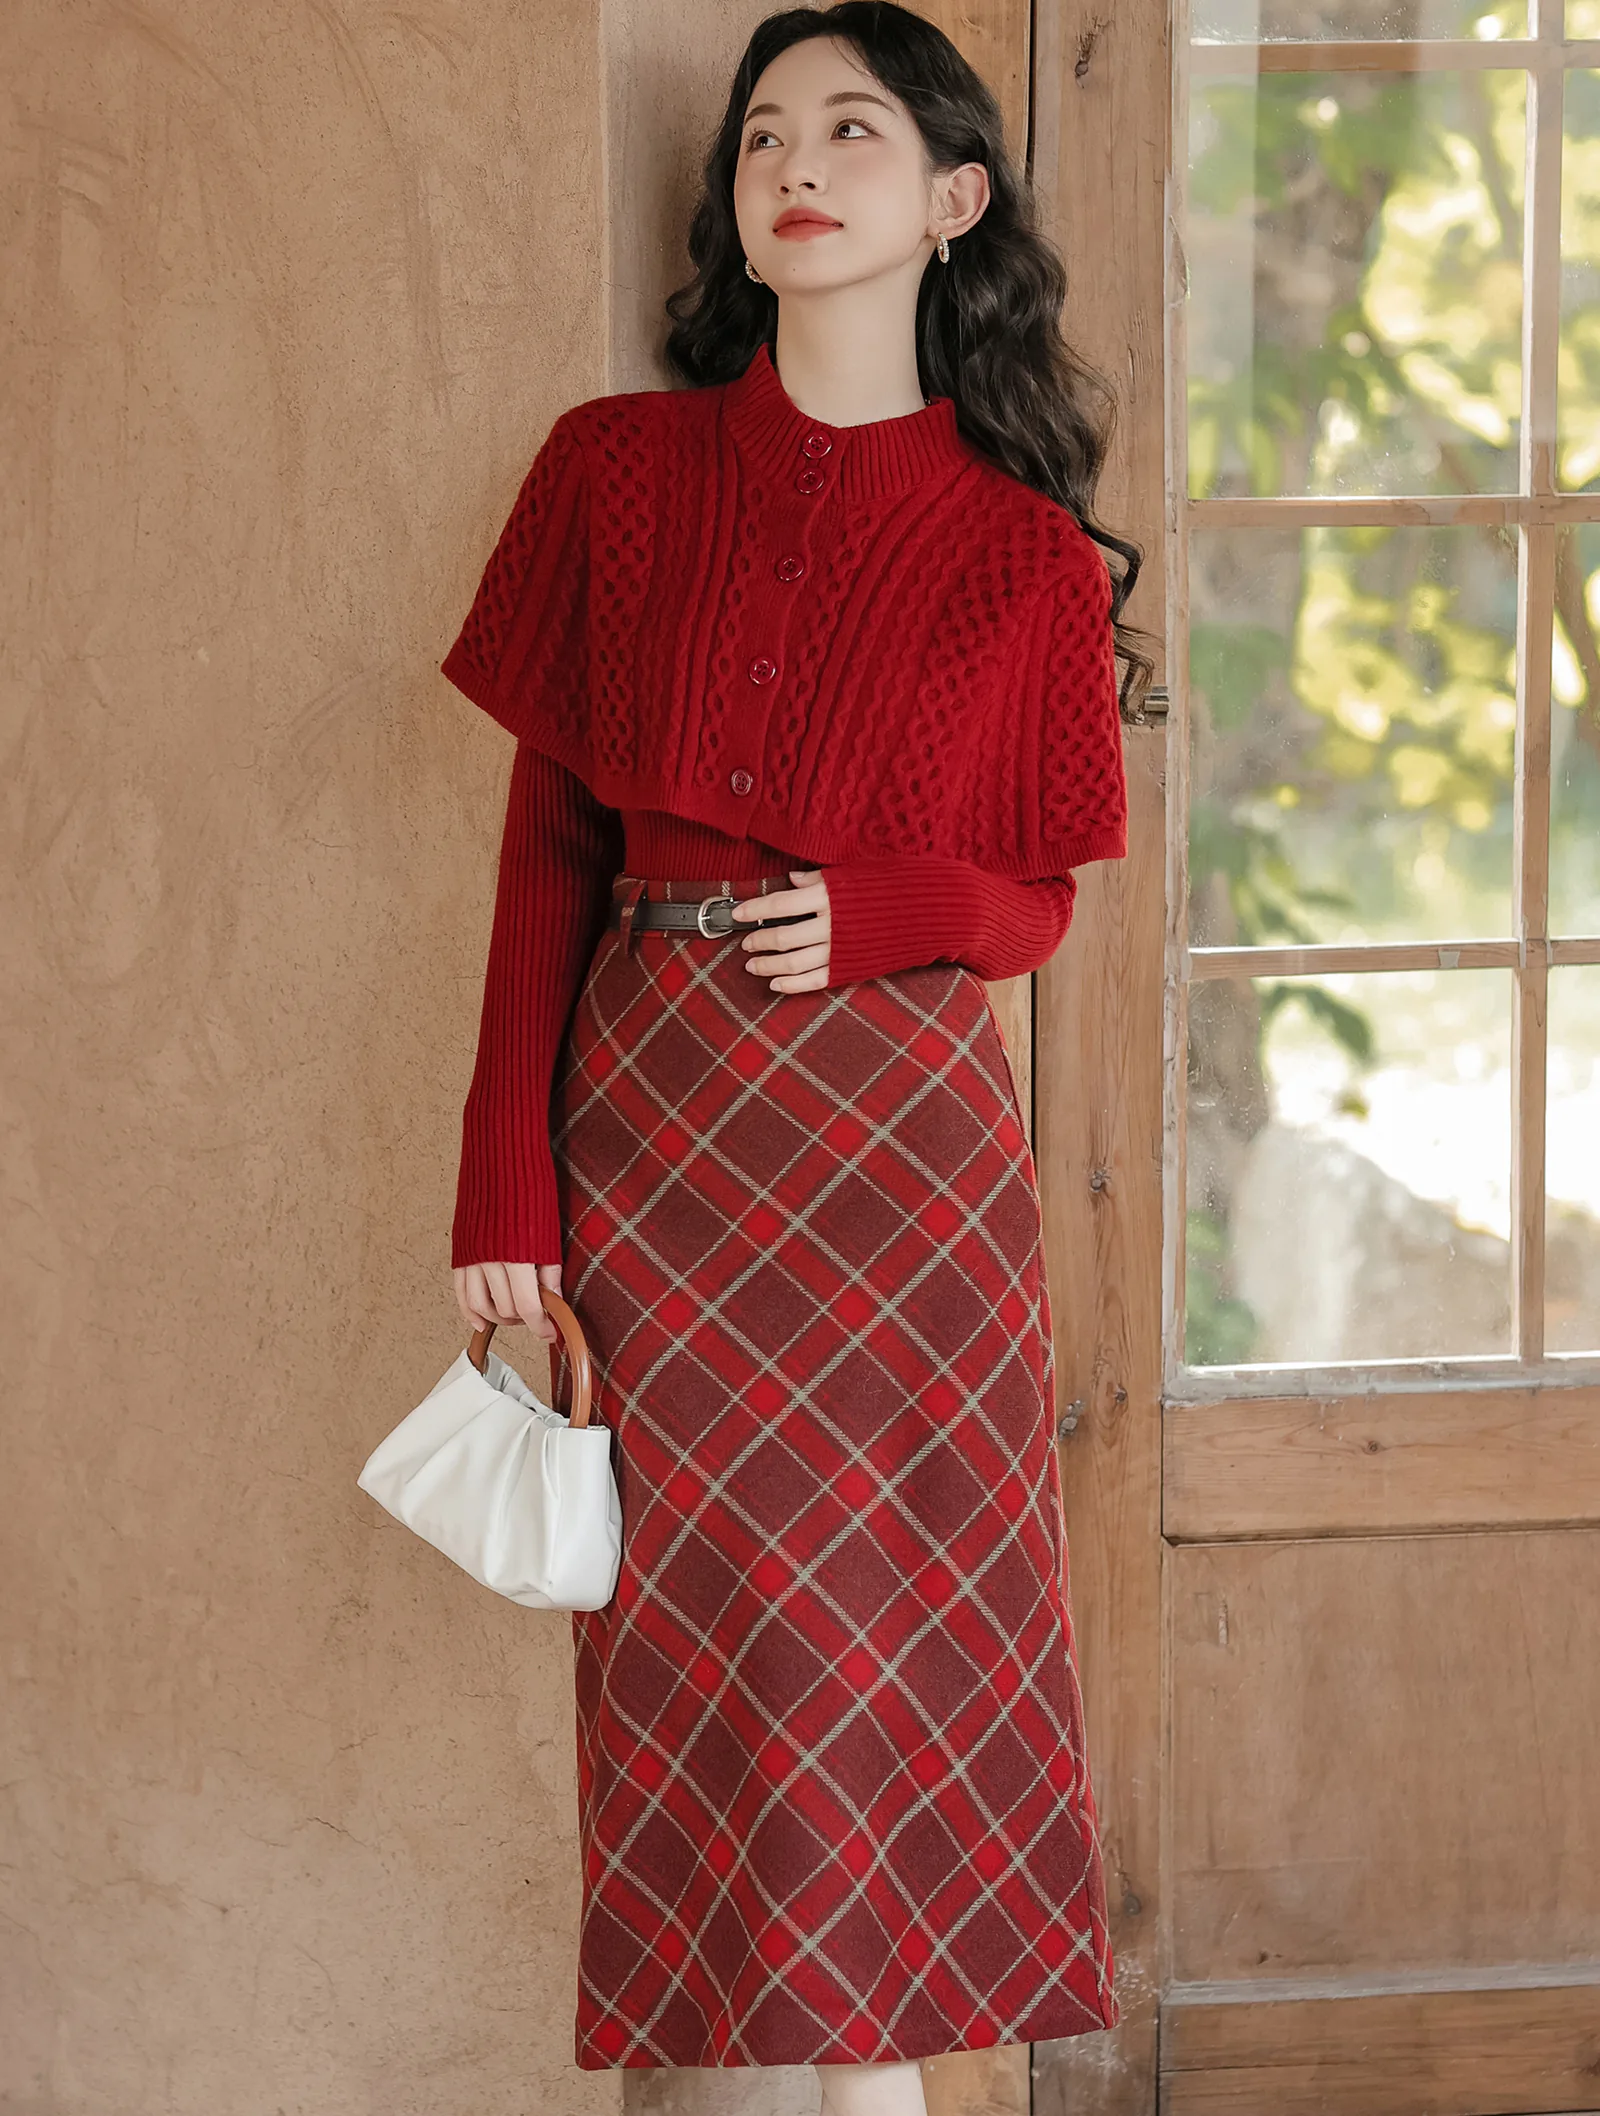 Fashion Ladies Plaid Skirt with Red Long Sleeve Sweater Casual Suit01